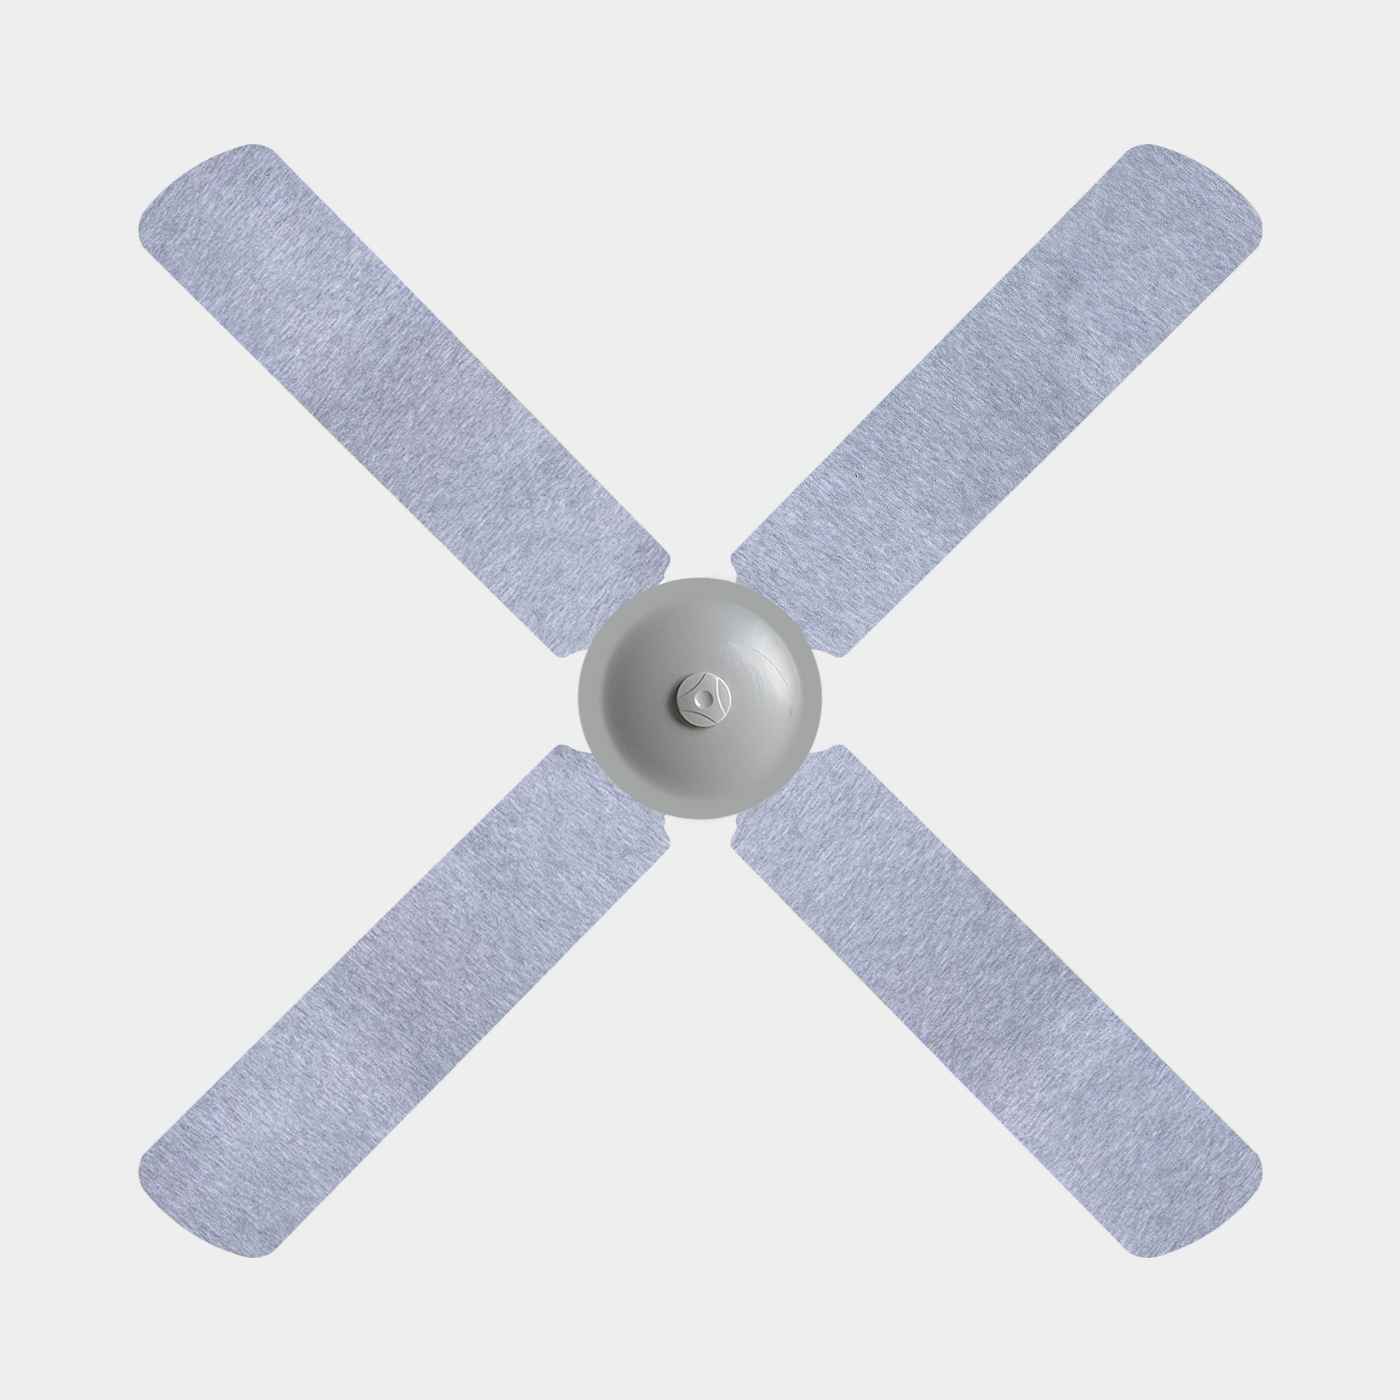 Four light grey coloured fan blade covers